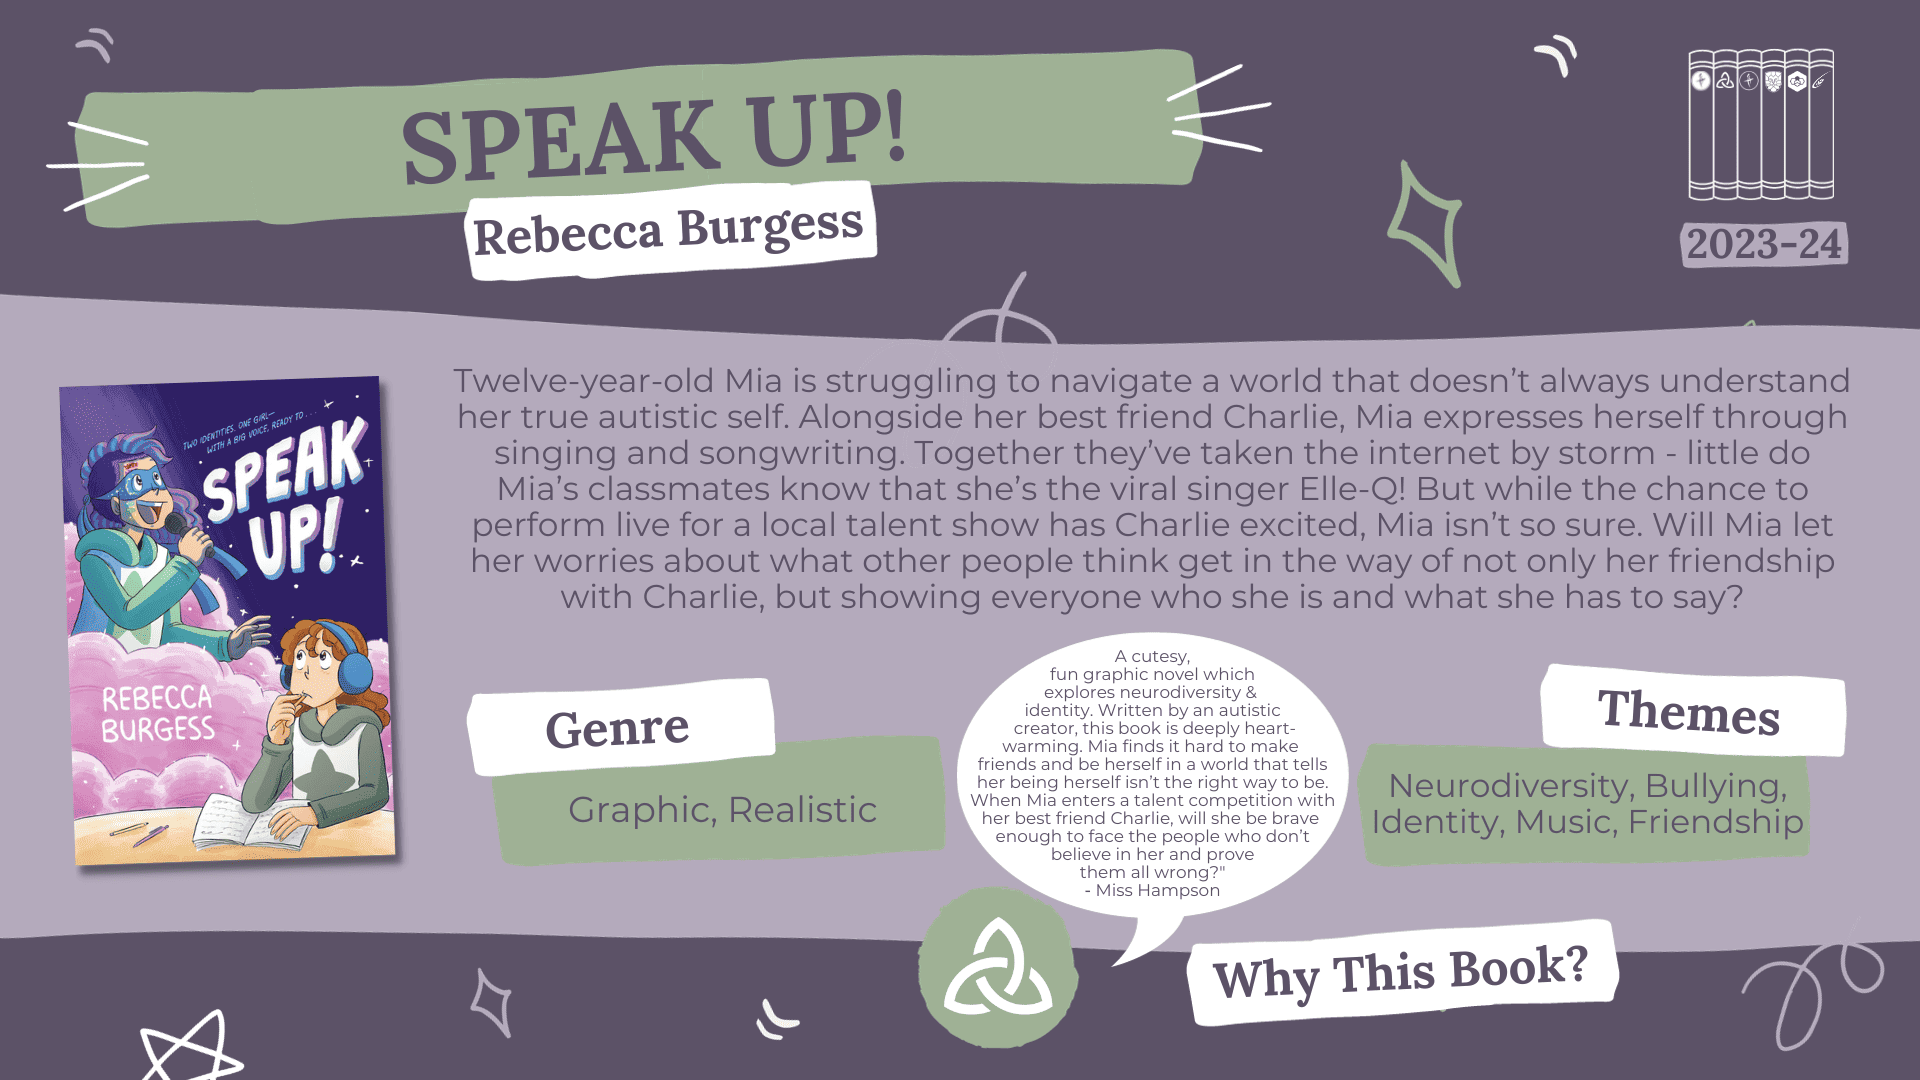 A fact card about a book nominated for the Laurus Trust Libraries Book Award 2023-2024: Speak Up! by Rebecca Burgess Blurb Reads: Twelve-year-old Mia is struggling to navigate a world that doesn't always understand her true autistic self. Alongside her best friend Charlie, Mia expresses herself through singing and songwriting. Together they've taken the internet by storm - little do Mia's classmates know that she's the viral singer Elle-Q! But while the chance to perform live for a local talent show has Charlie excited, Mia isn't so sure. Will Mia let her worries about what other people think get in the way of not only her friendship with Charlie, but showing everyone who she is and what she has to say? Genre: Graphic, Realistic Themes: Neurodiversity, Bullying, Identity, Music, Friendship. Why this book? A cutesy, fun graphic novel which explores neurodiversity & identity. Written by an autistic creator, this book is deeply heart-warming. Mia finds it hard to make friends and be herself in a world that tells her being herself isn't the right way to be. When Mia enters a talent competition with her best friend Charlie, will she be brave enough to face the people who don't believe in her and prove them all wrong? - Miss Hampson (LR)